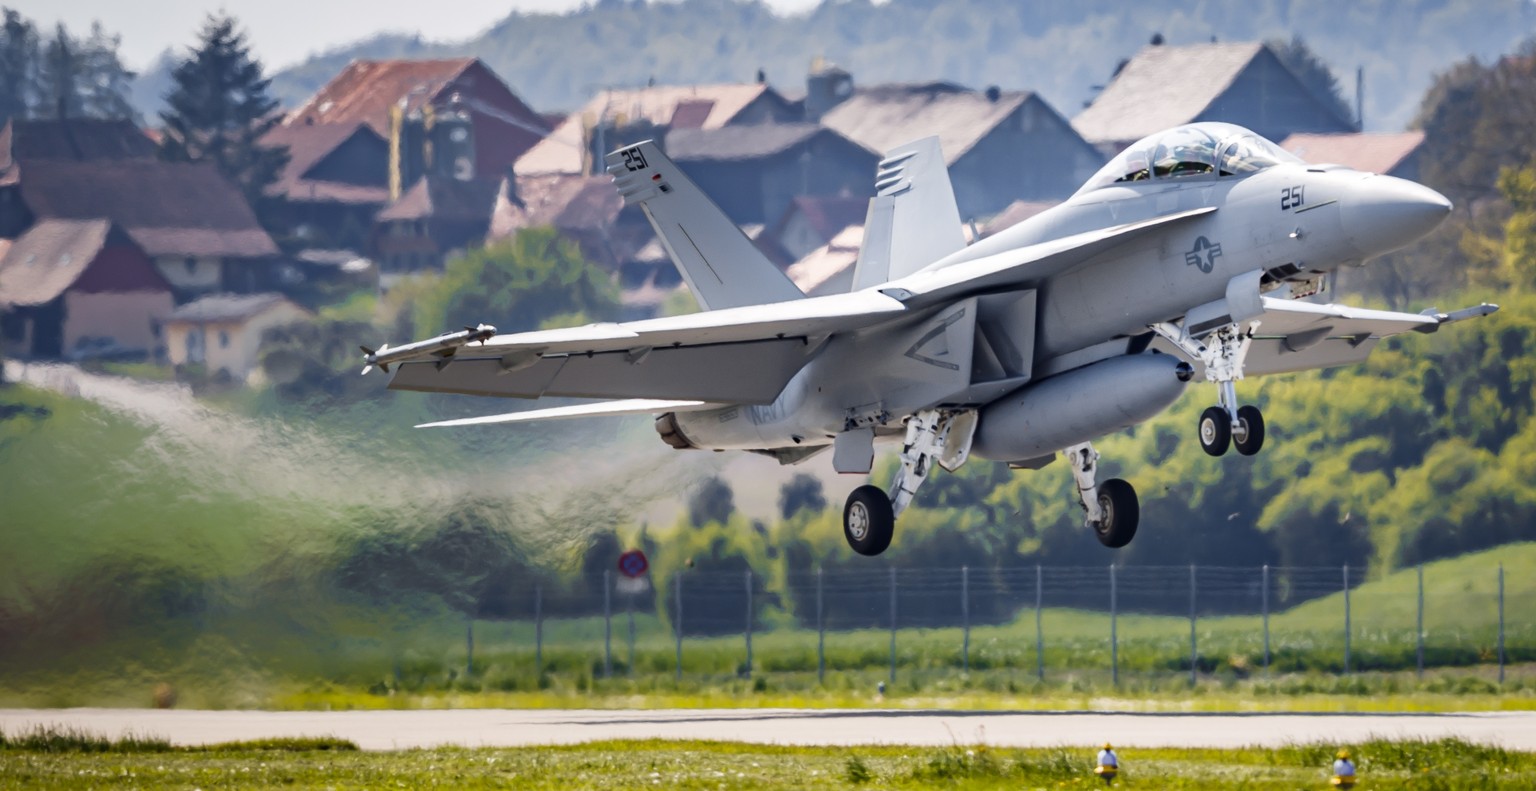 epa07538769 A Boeing F/A-18 Super Hornet fighter jet takes off during a test and evaluation day at the Swiss Army airbase, in Payerne, Switzerland, 30 April 2019. EPA/VALENTIN FLAURAUD